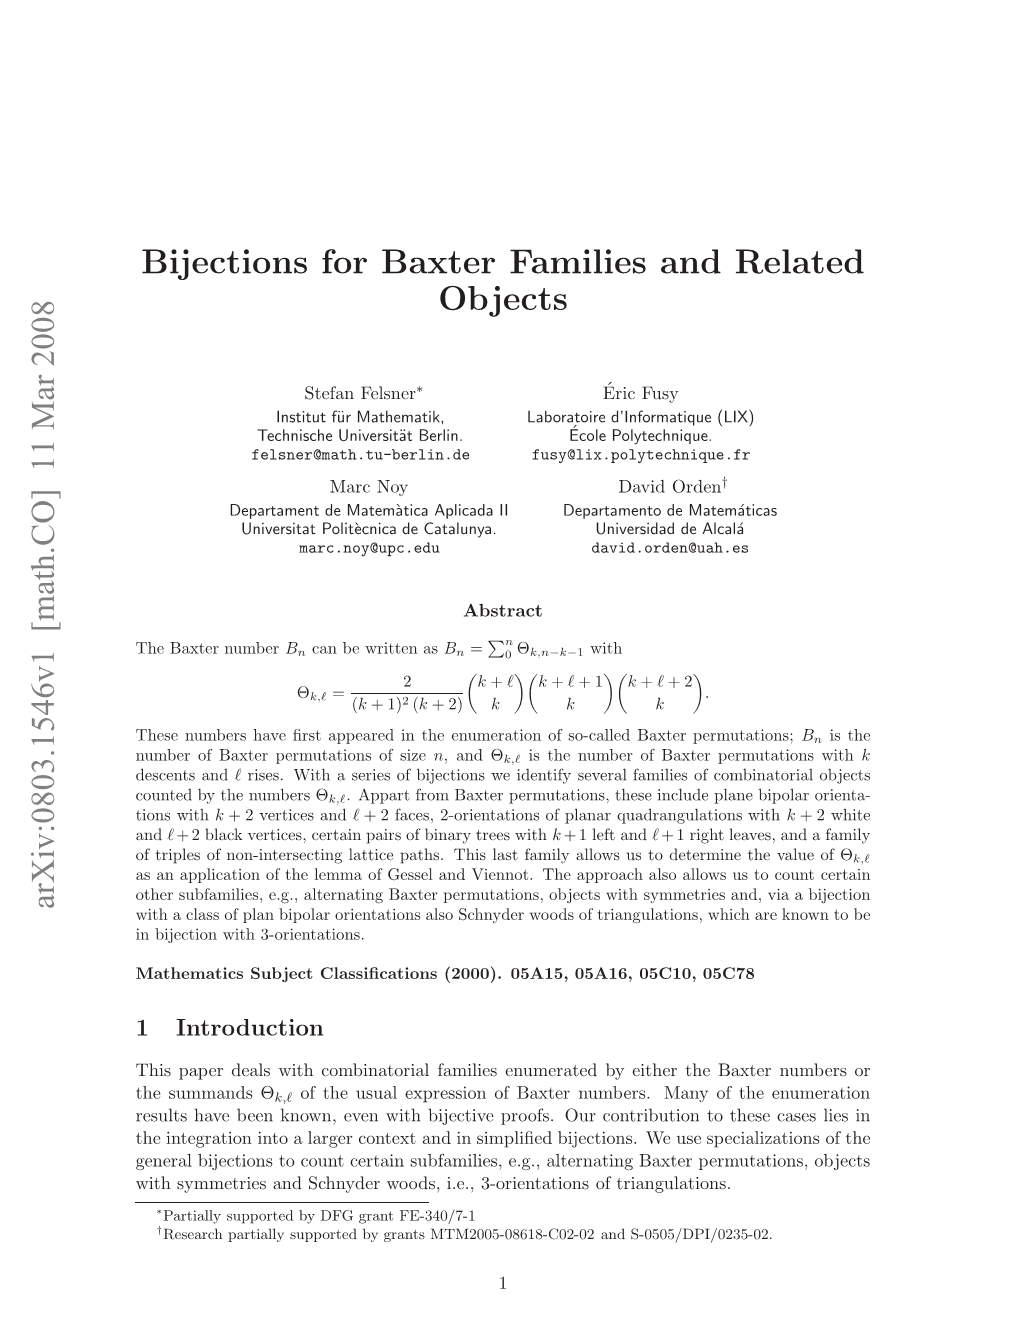 Bijections for Baxter Families and Related Objects